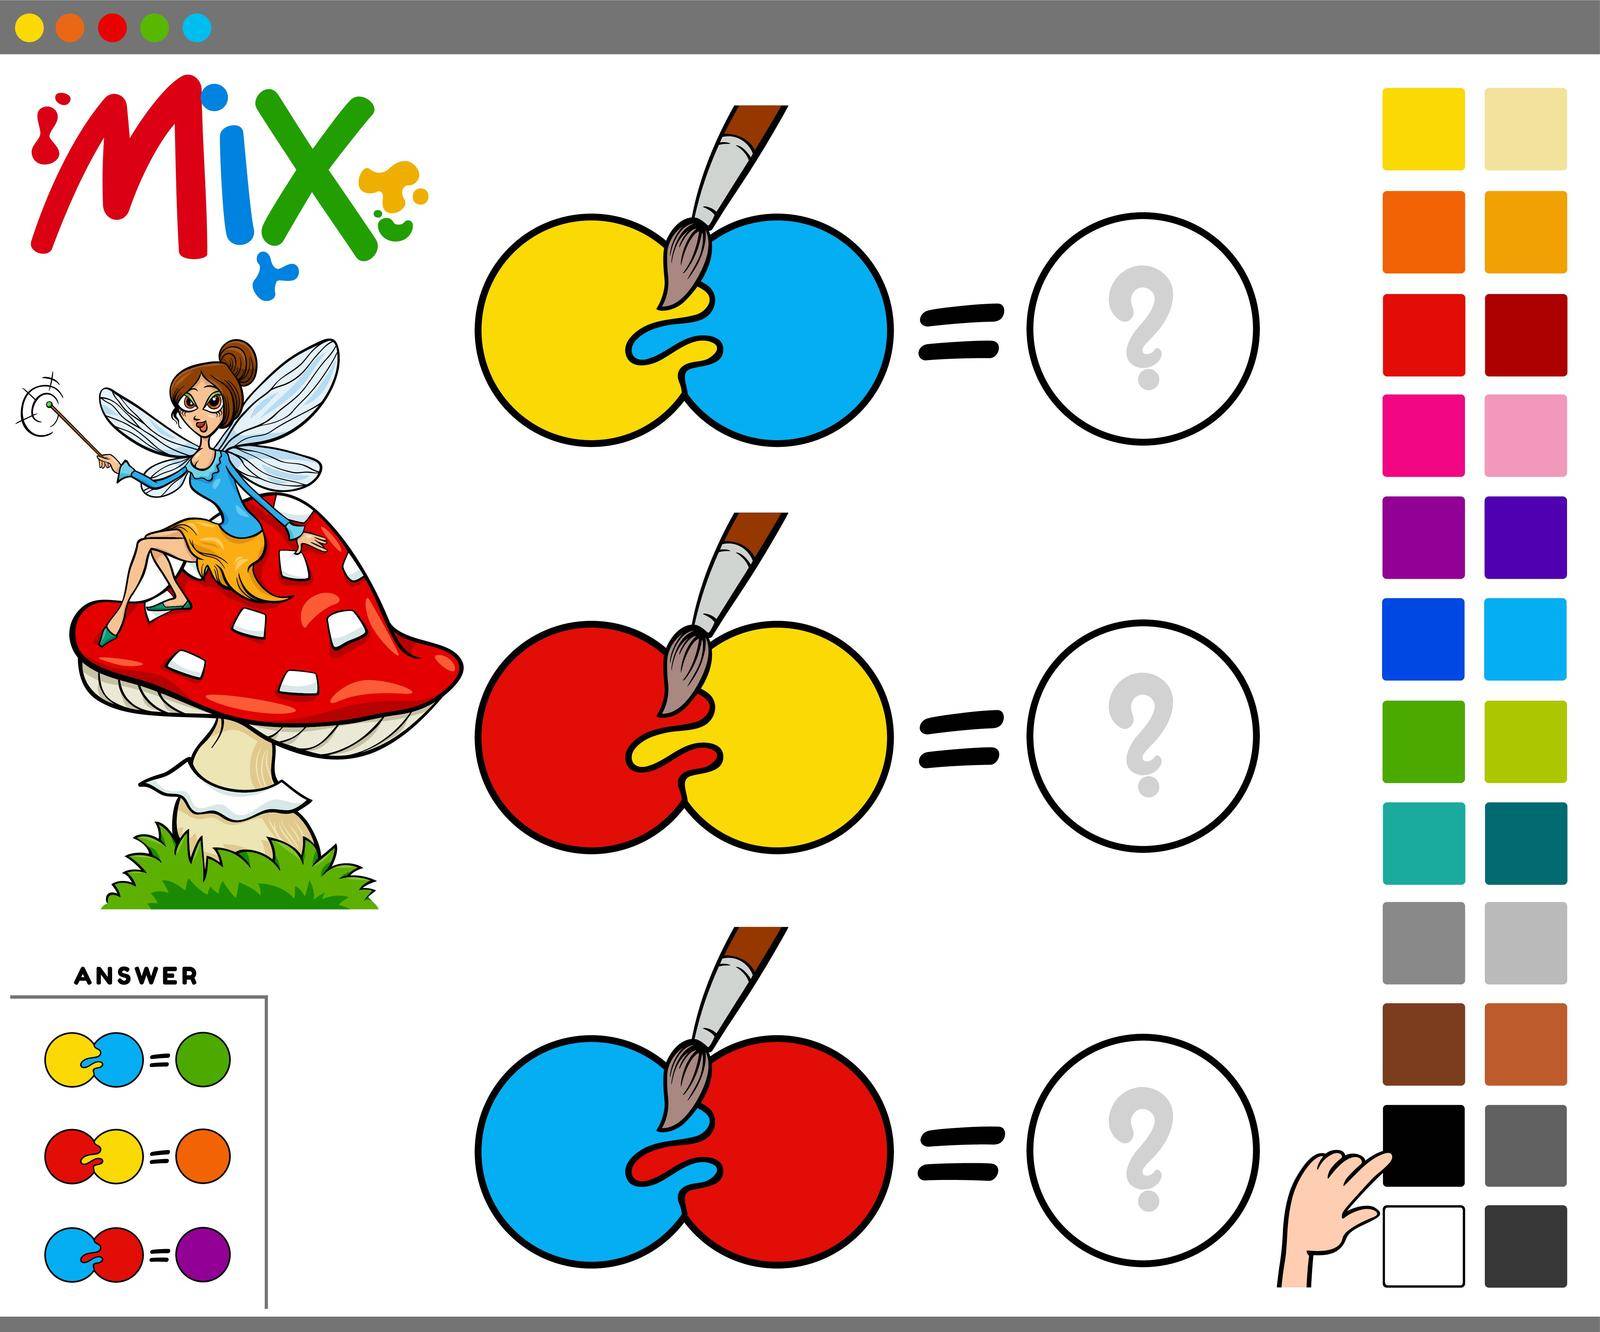 Cartoon illustration of mixing colors educational task for children